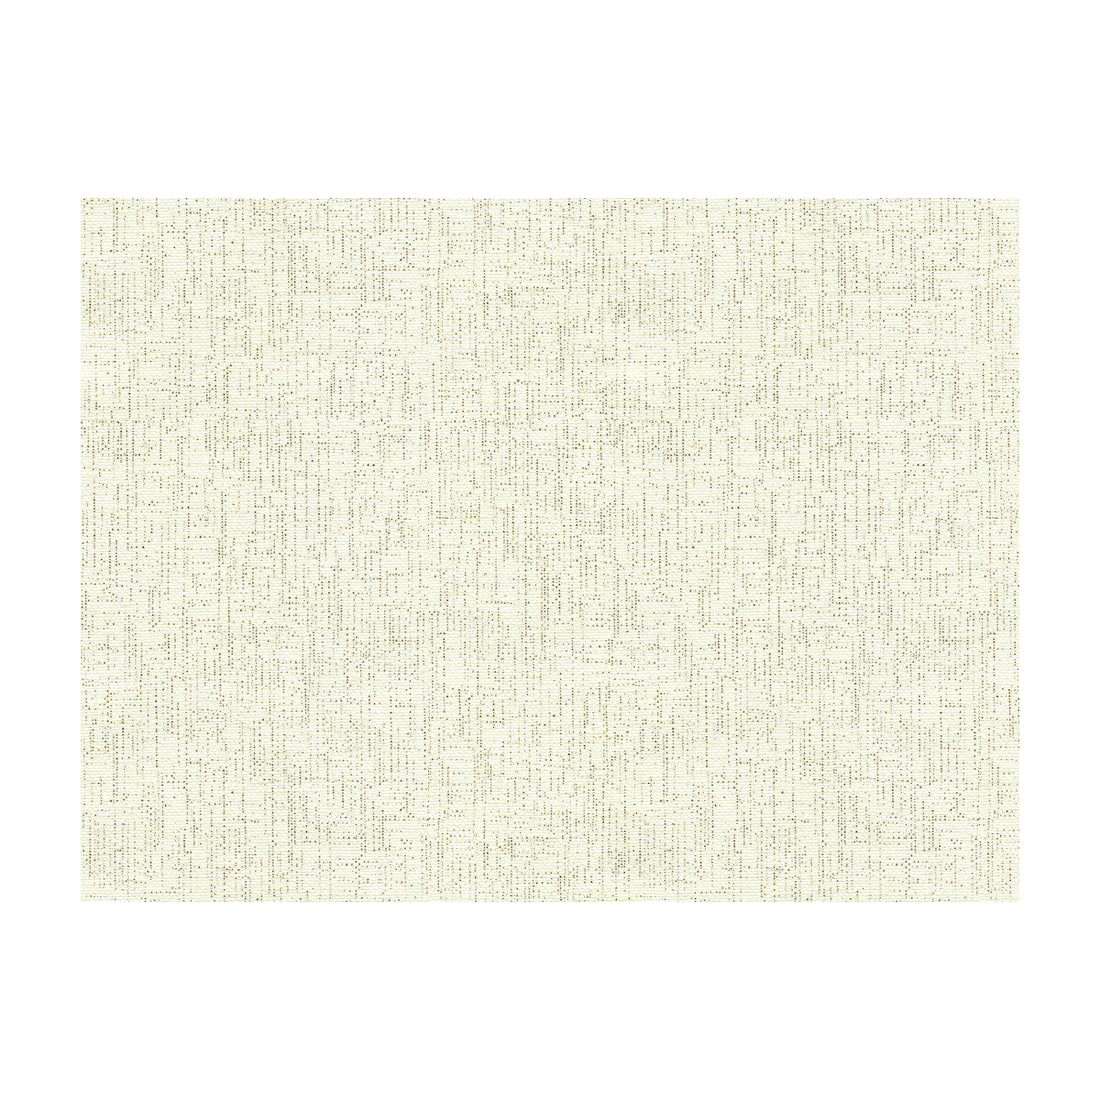 Kravet Basics fabric in 33198-416 color - pattern 33198.416.0 - by Kravet Basics in the Perfect Plains collection